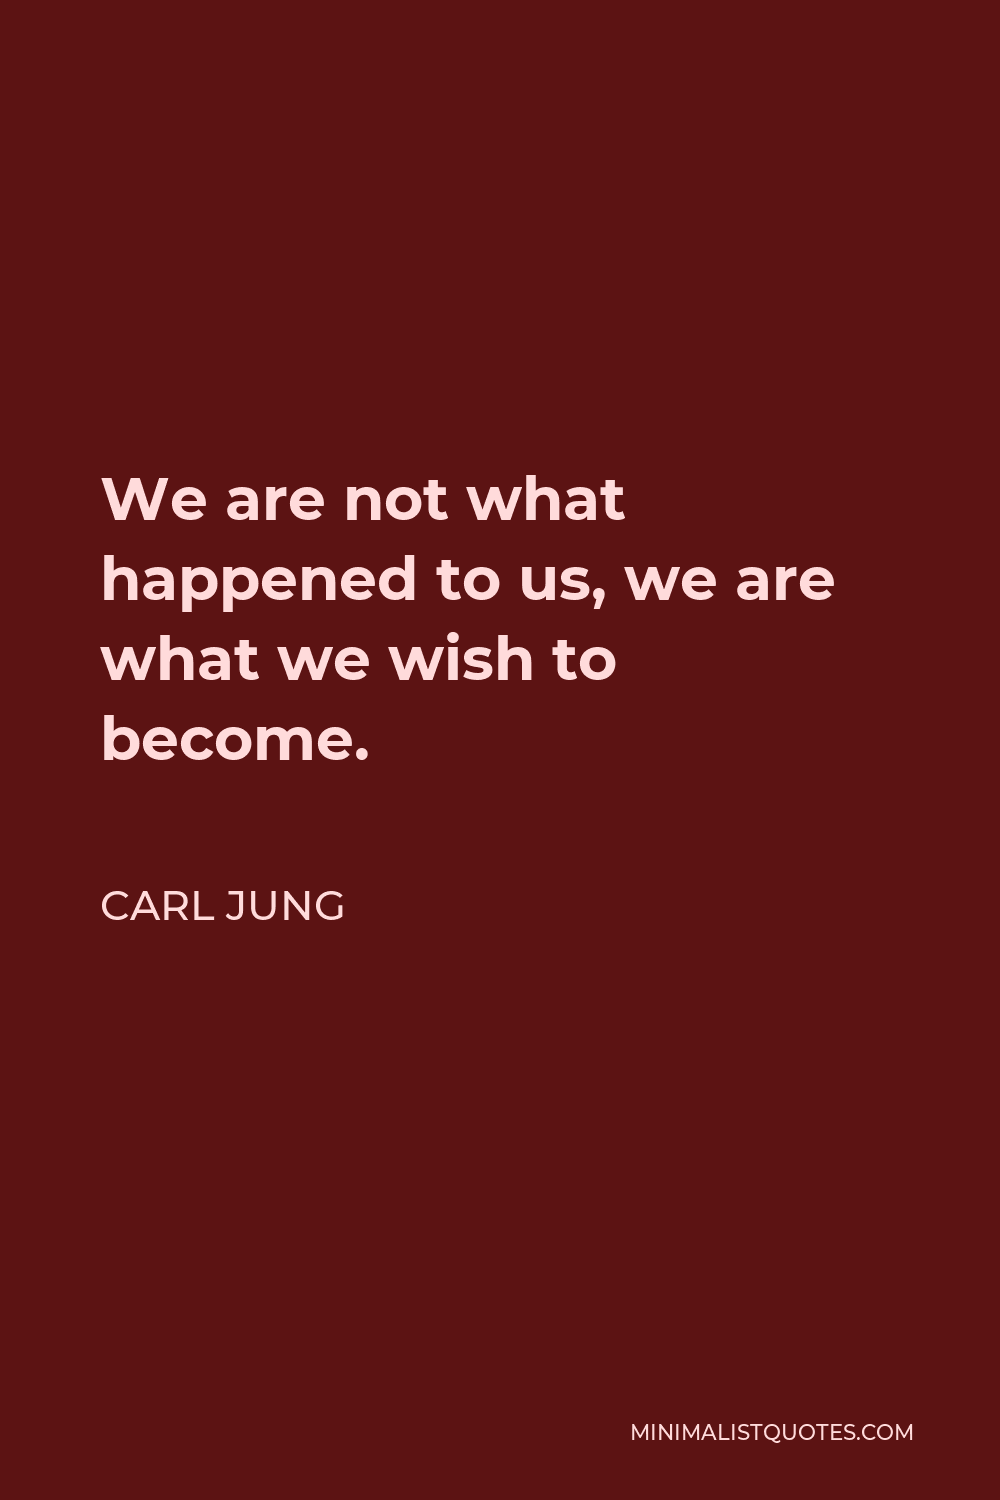 Carl Jung Quote - We are not what happened to us, we are what we wish to become.